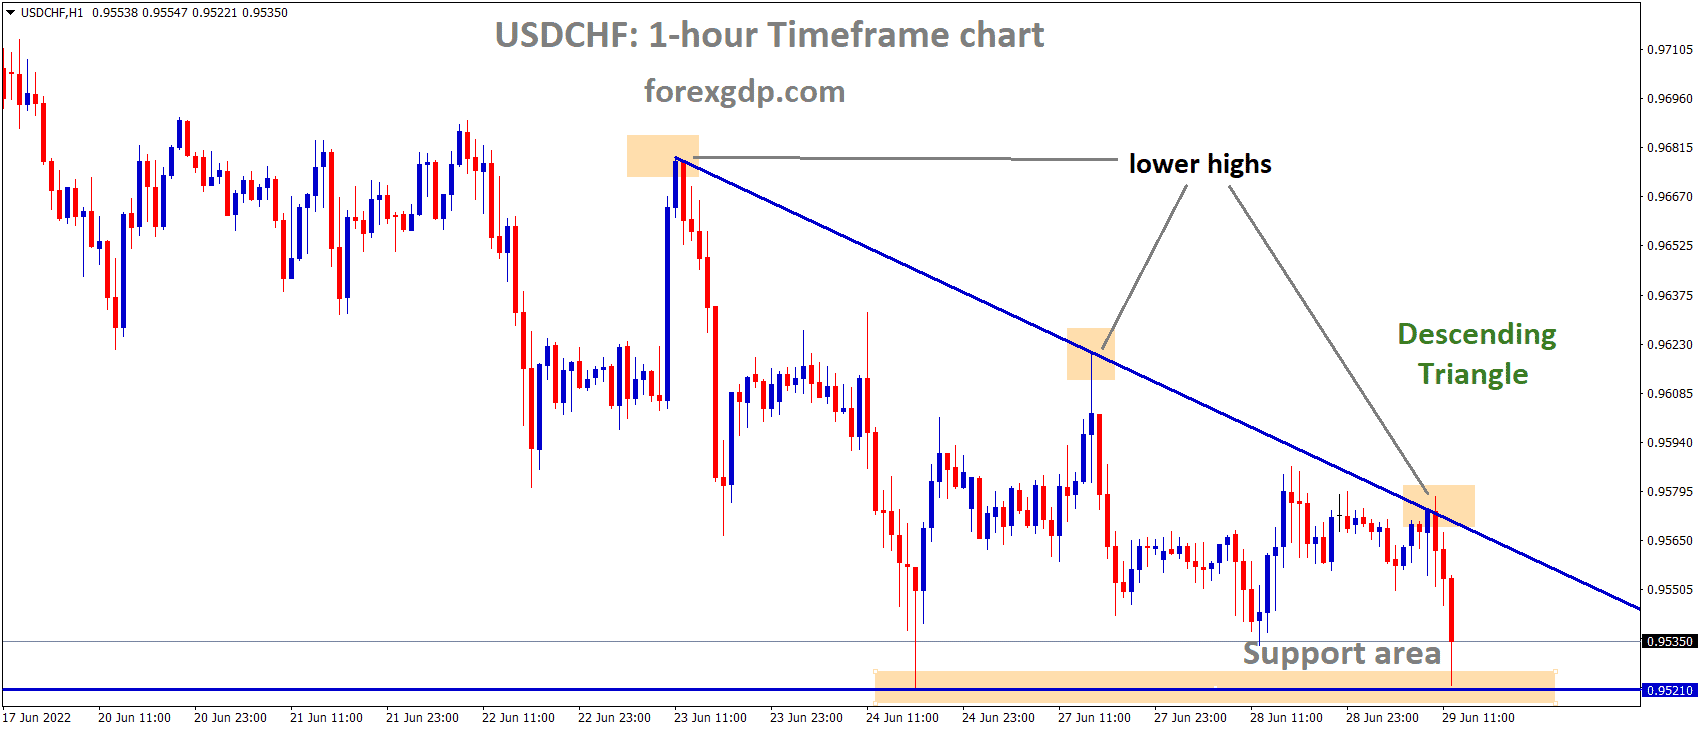 USDCHF is moving in the Descending triangle pattern and the market has rebounded from the Horizontal support area of the Pattern